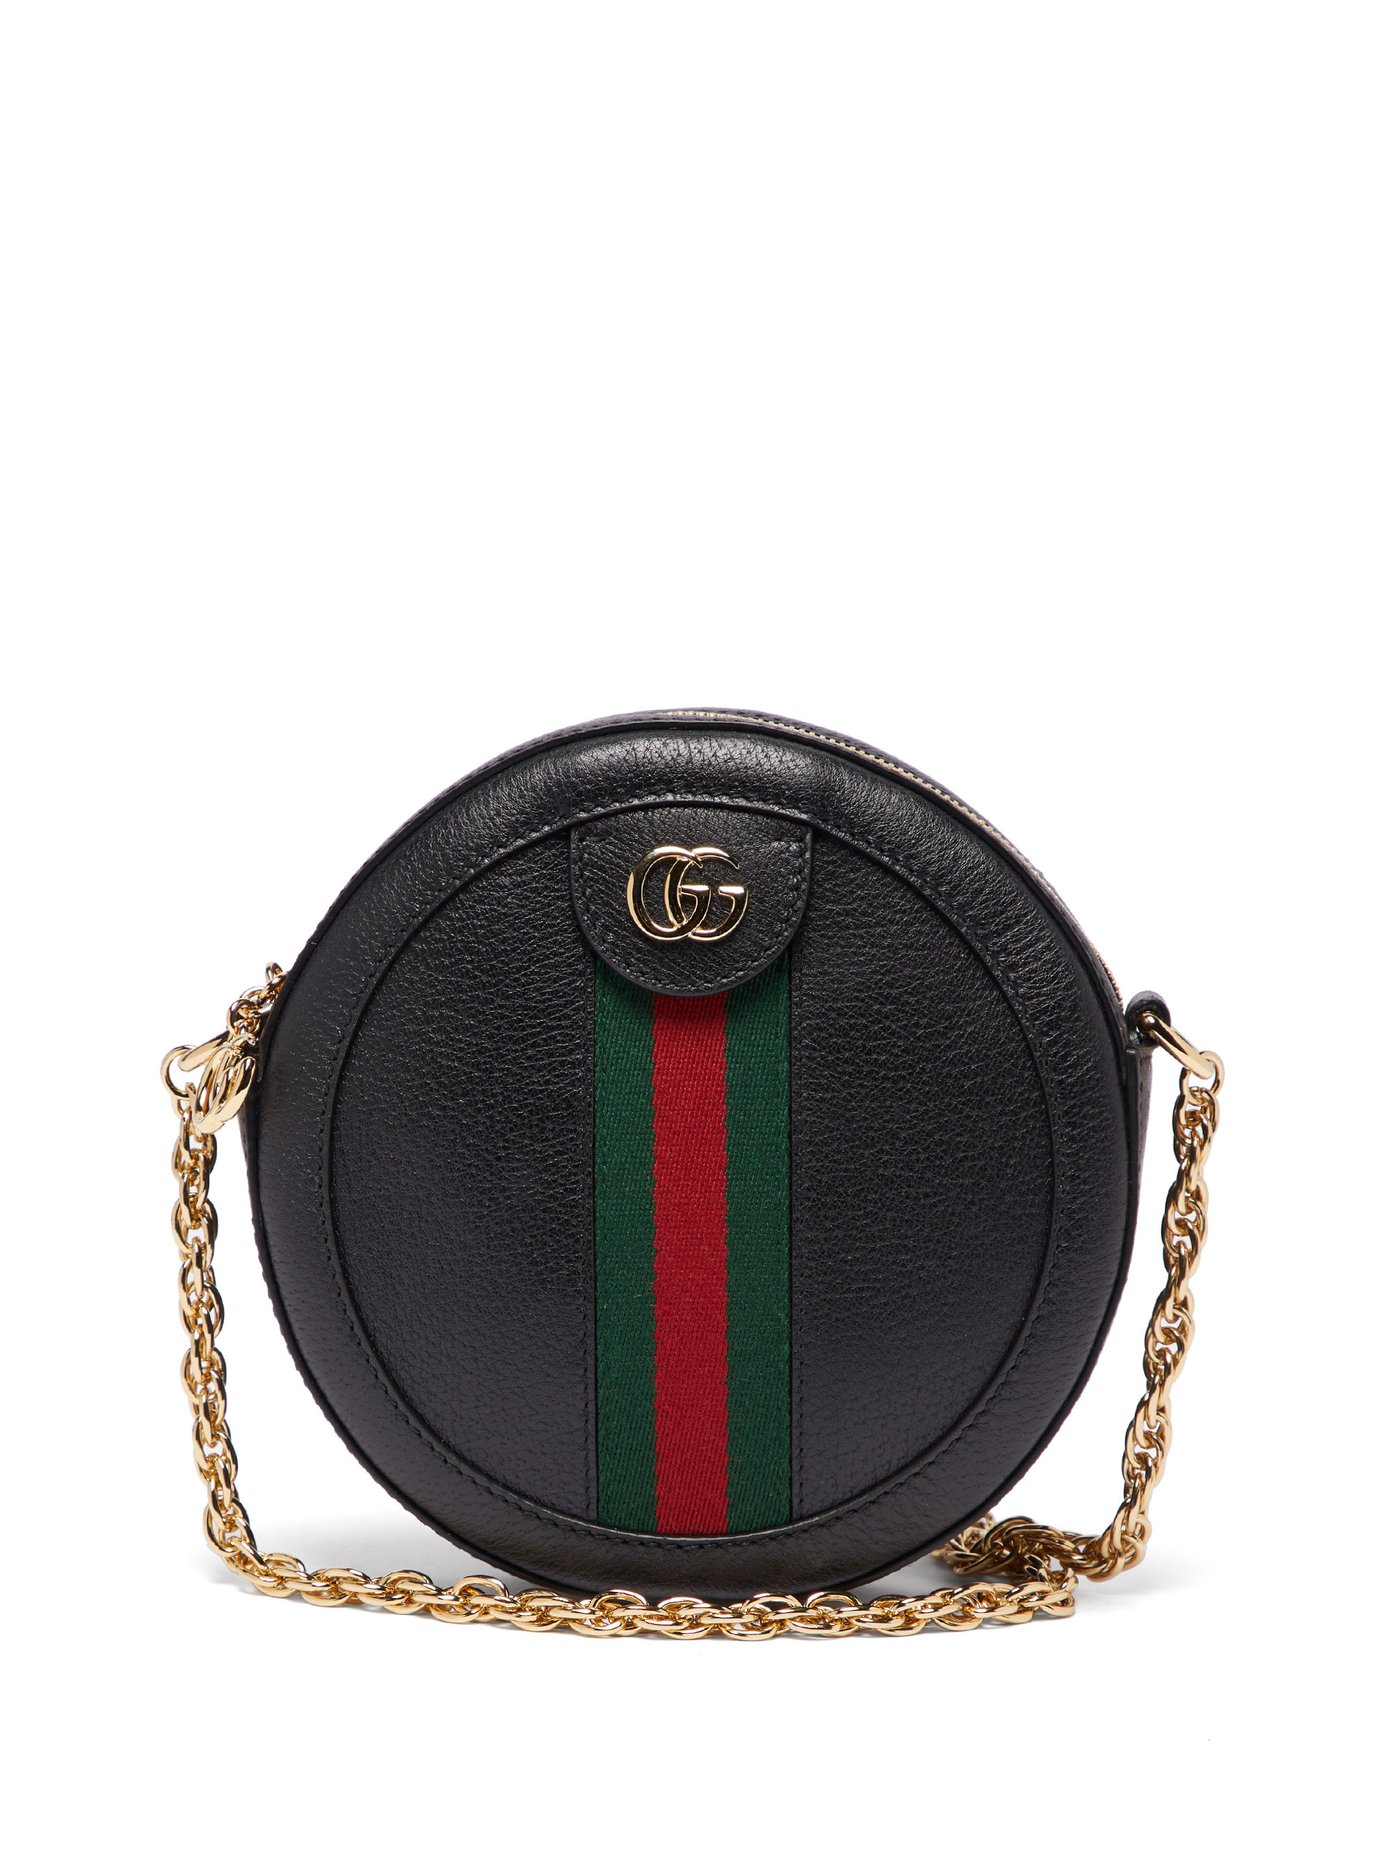 Ophidia leather cross-body bag | Gucci 